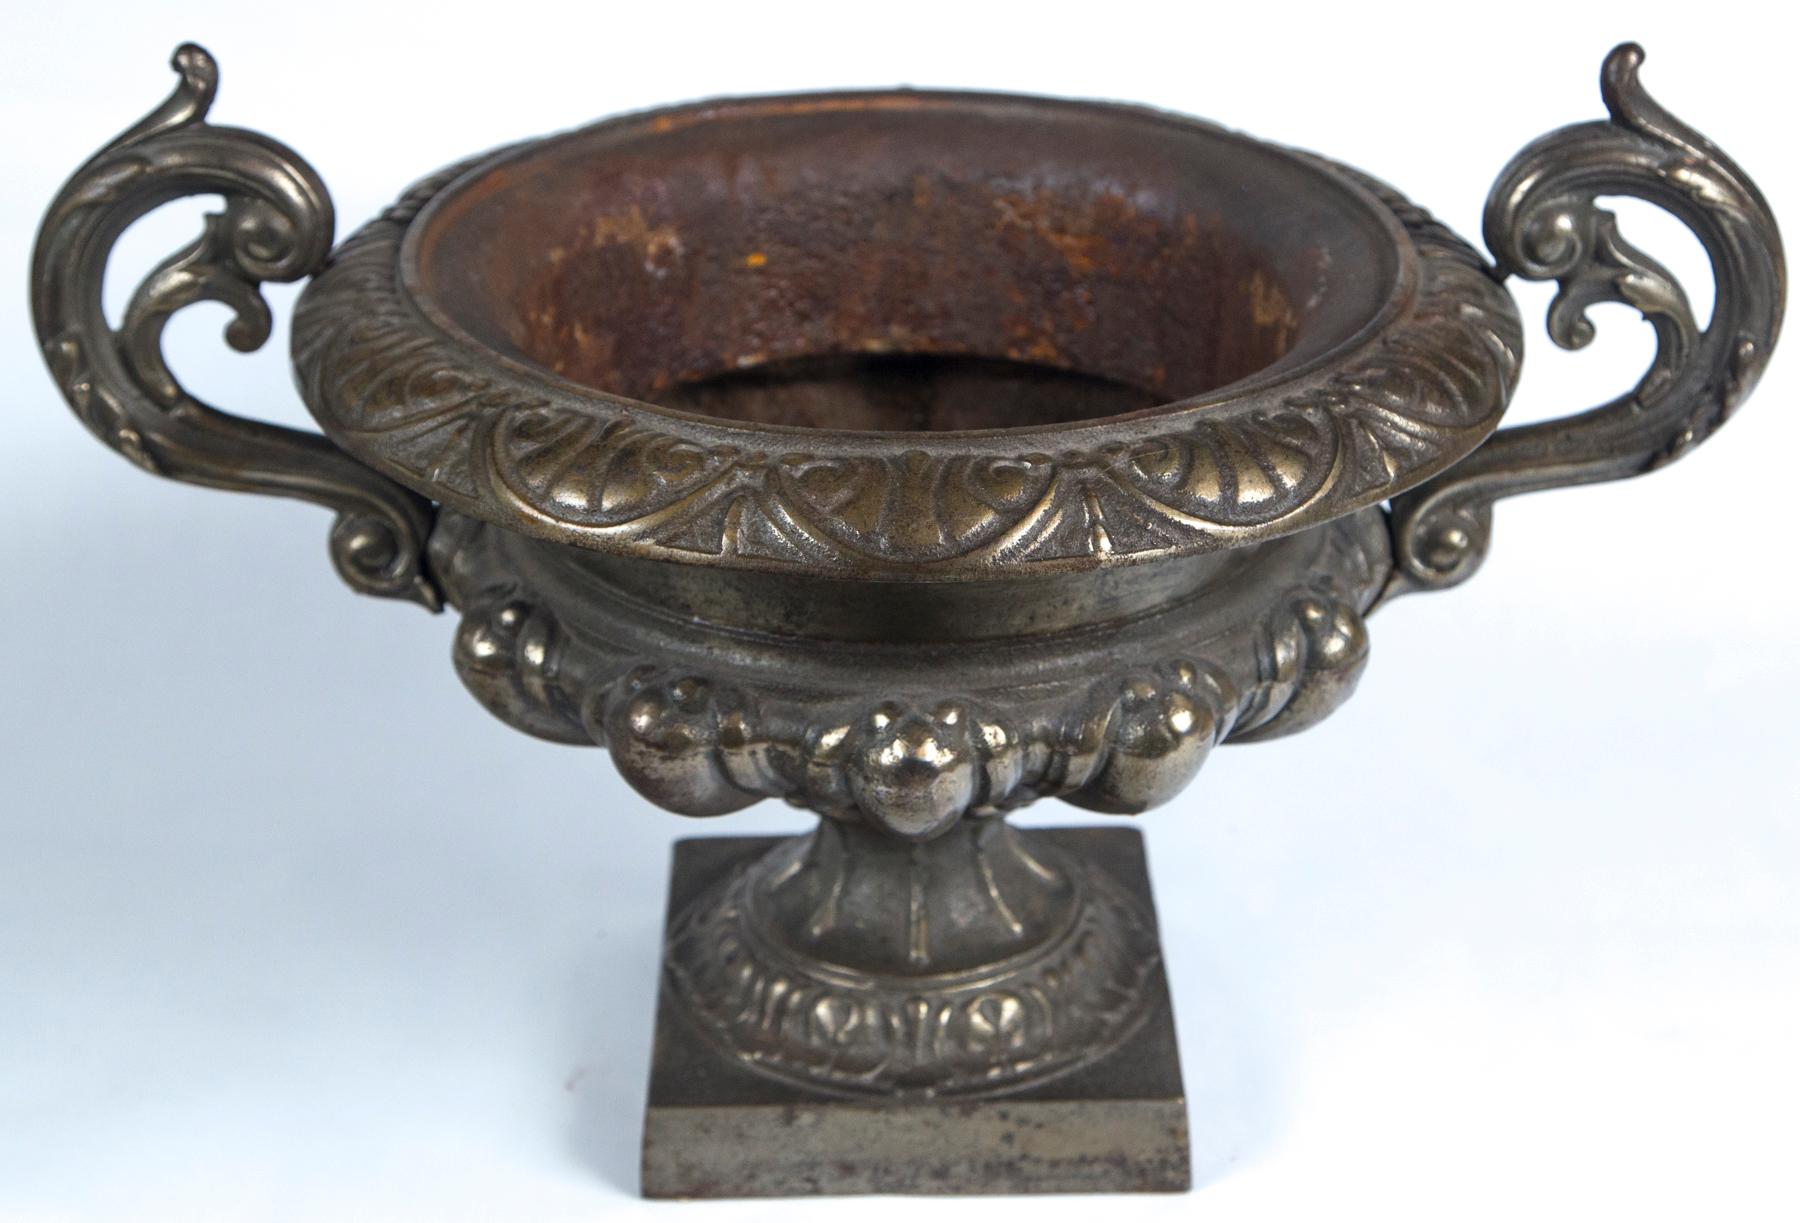 Cast iron urn, France, circa 1900. Classic Art Nouveau design with scrolled handles. Dark bronze patinated finish.